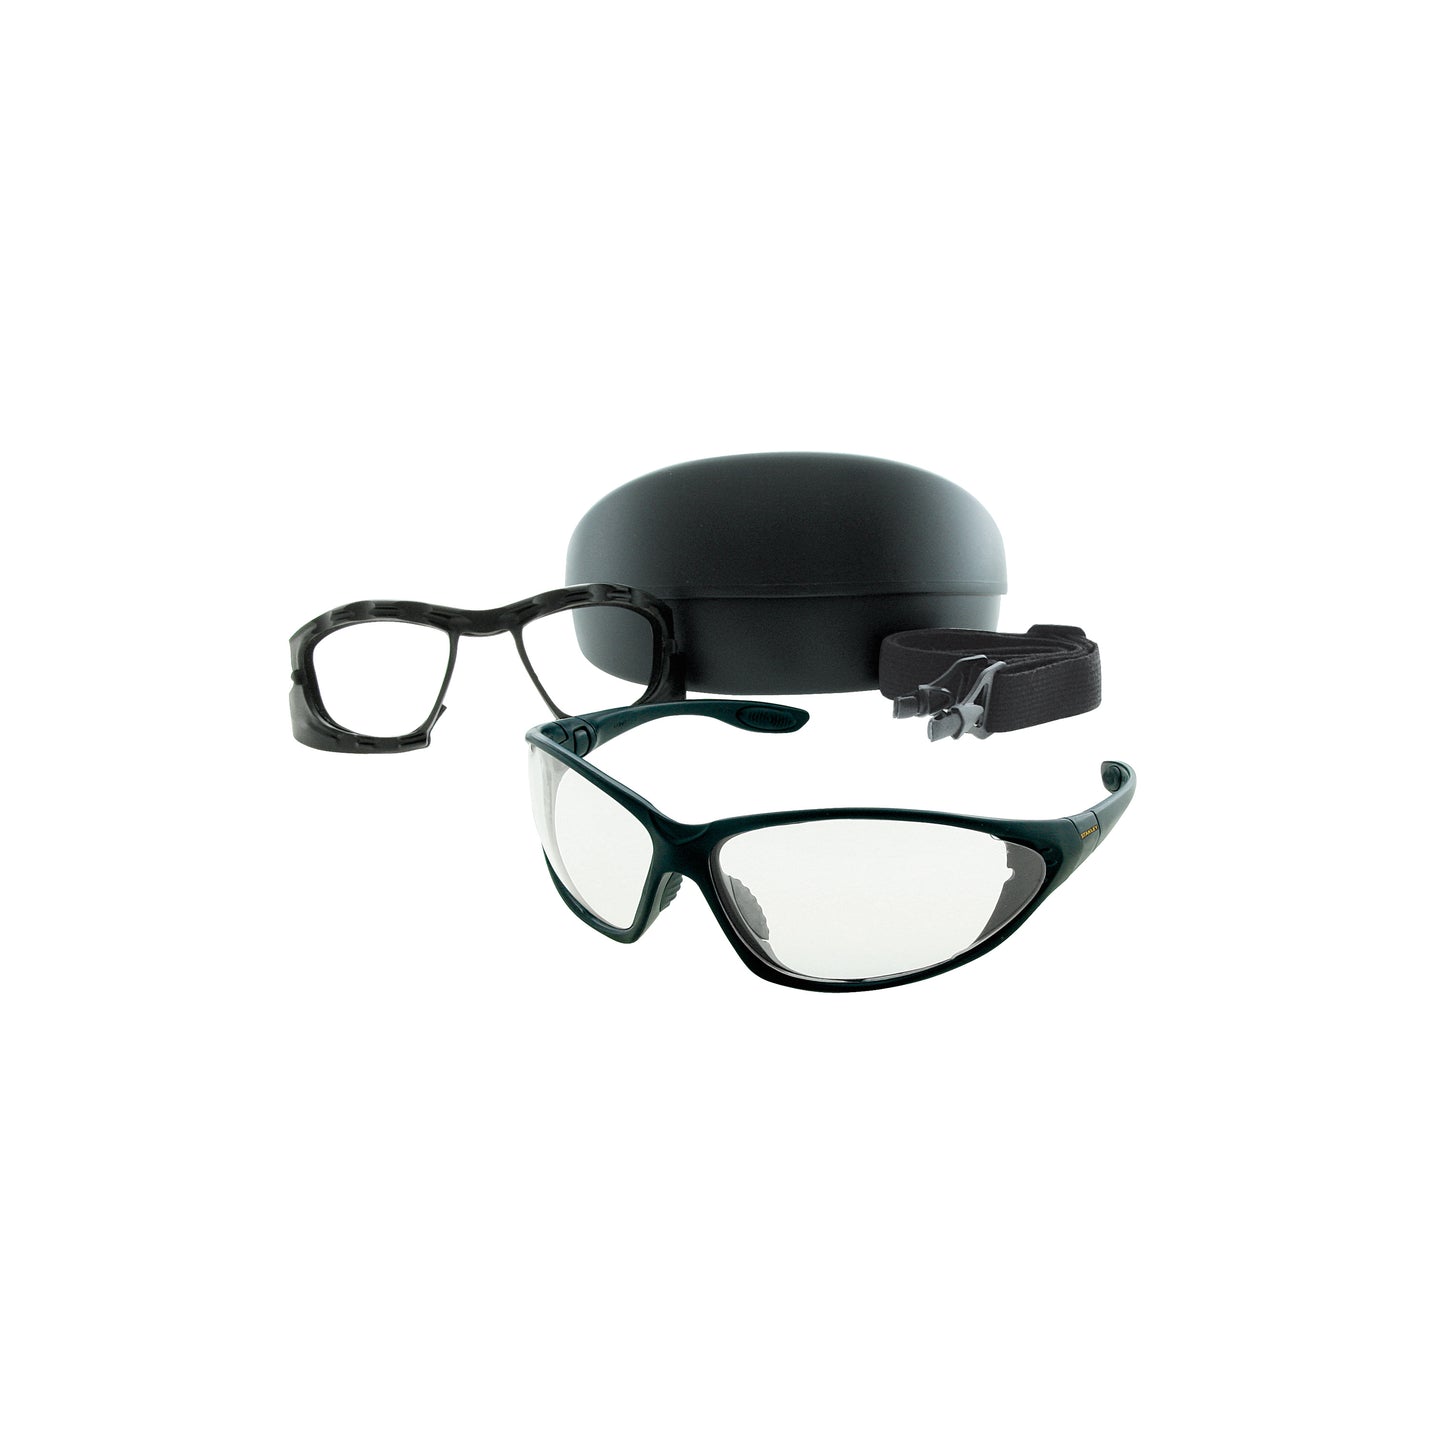 Stanley Seismic Series Safety Glasses